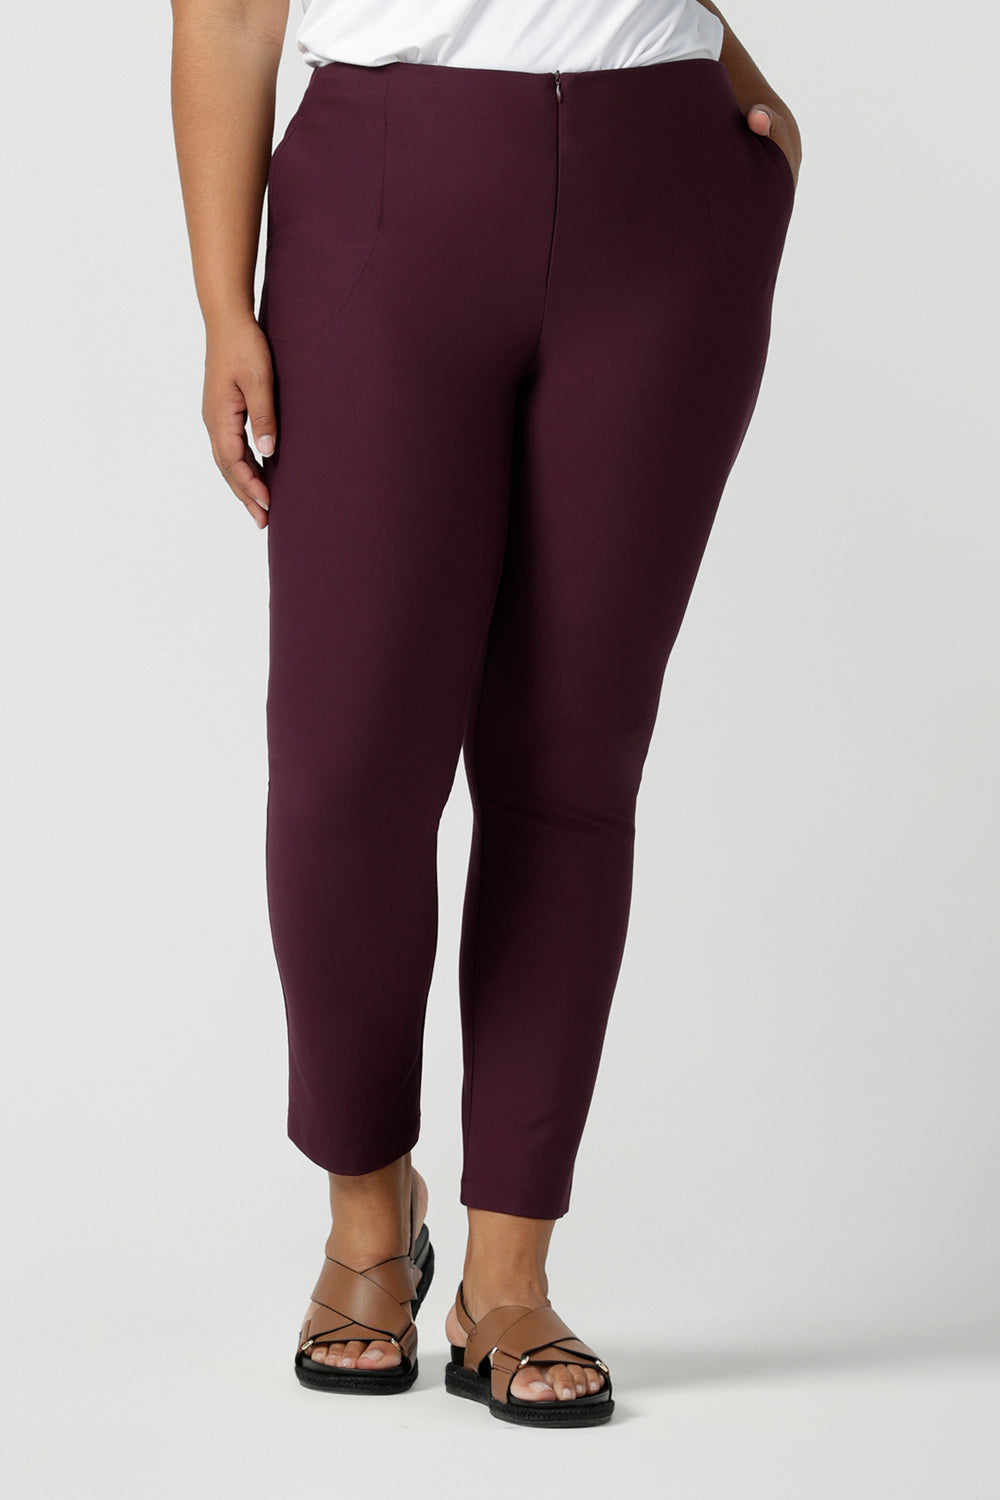 Great pants for plus size, curvy women, these slim leg, cropped length tailored pants are shown on a size 18 woman. Made in Australia by Australian and New Zealand women's clothing brand, L&F these work pants are available to shop online in sizes 8 to 24.